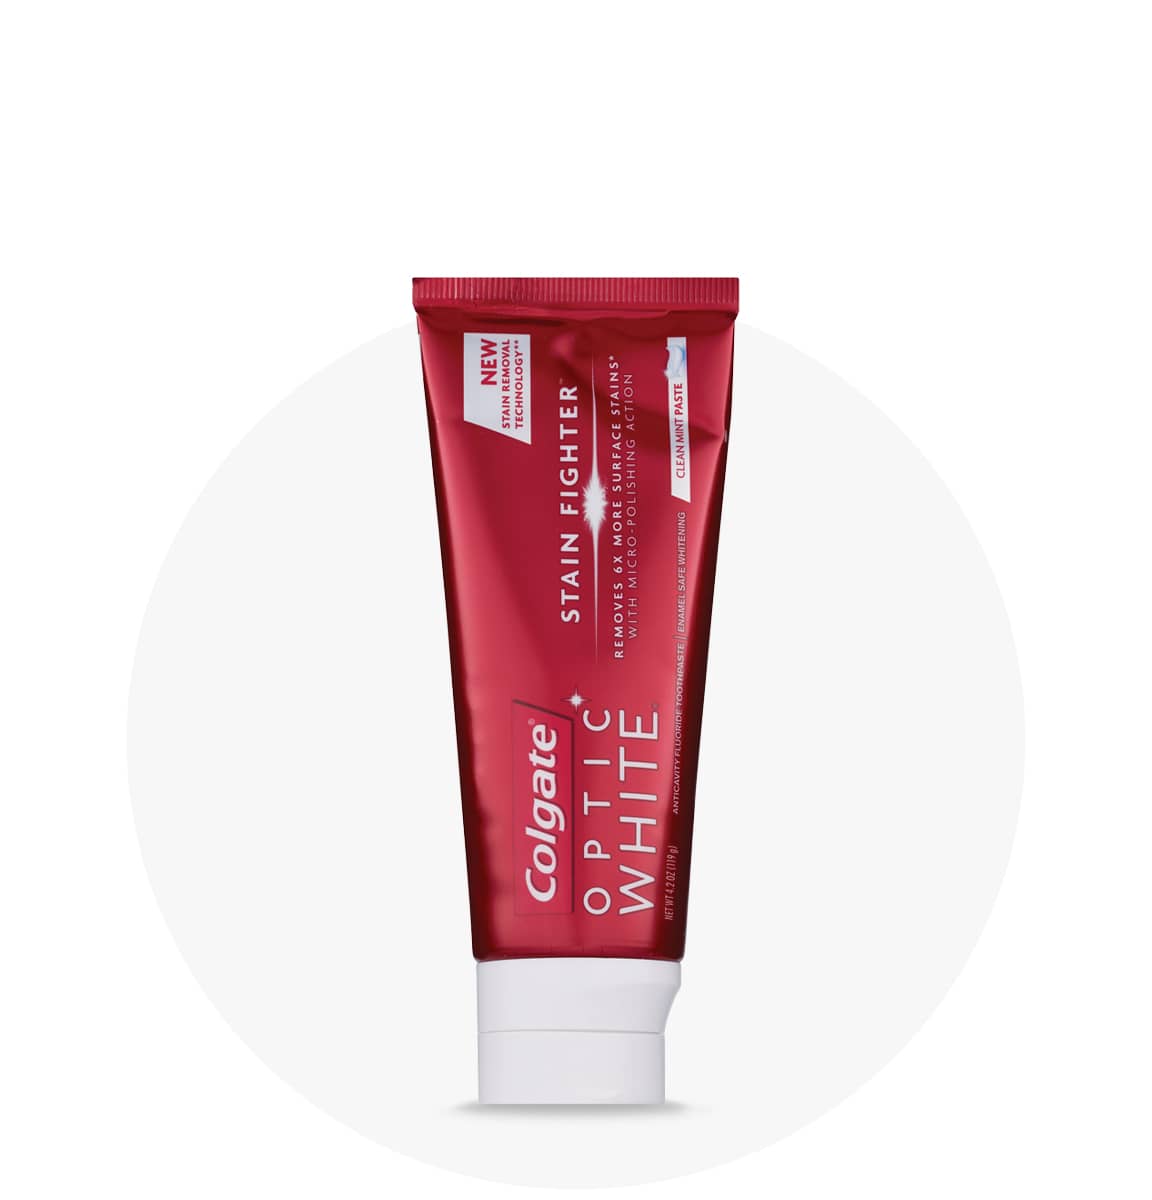 Shop for Colgate® Optic White® whitening toothpaste